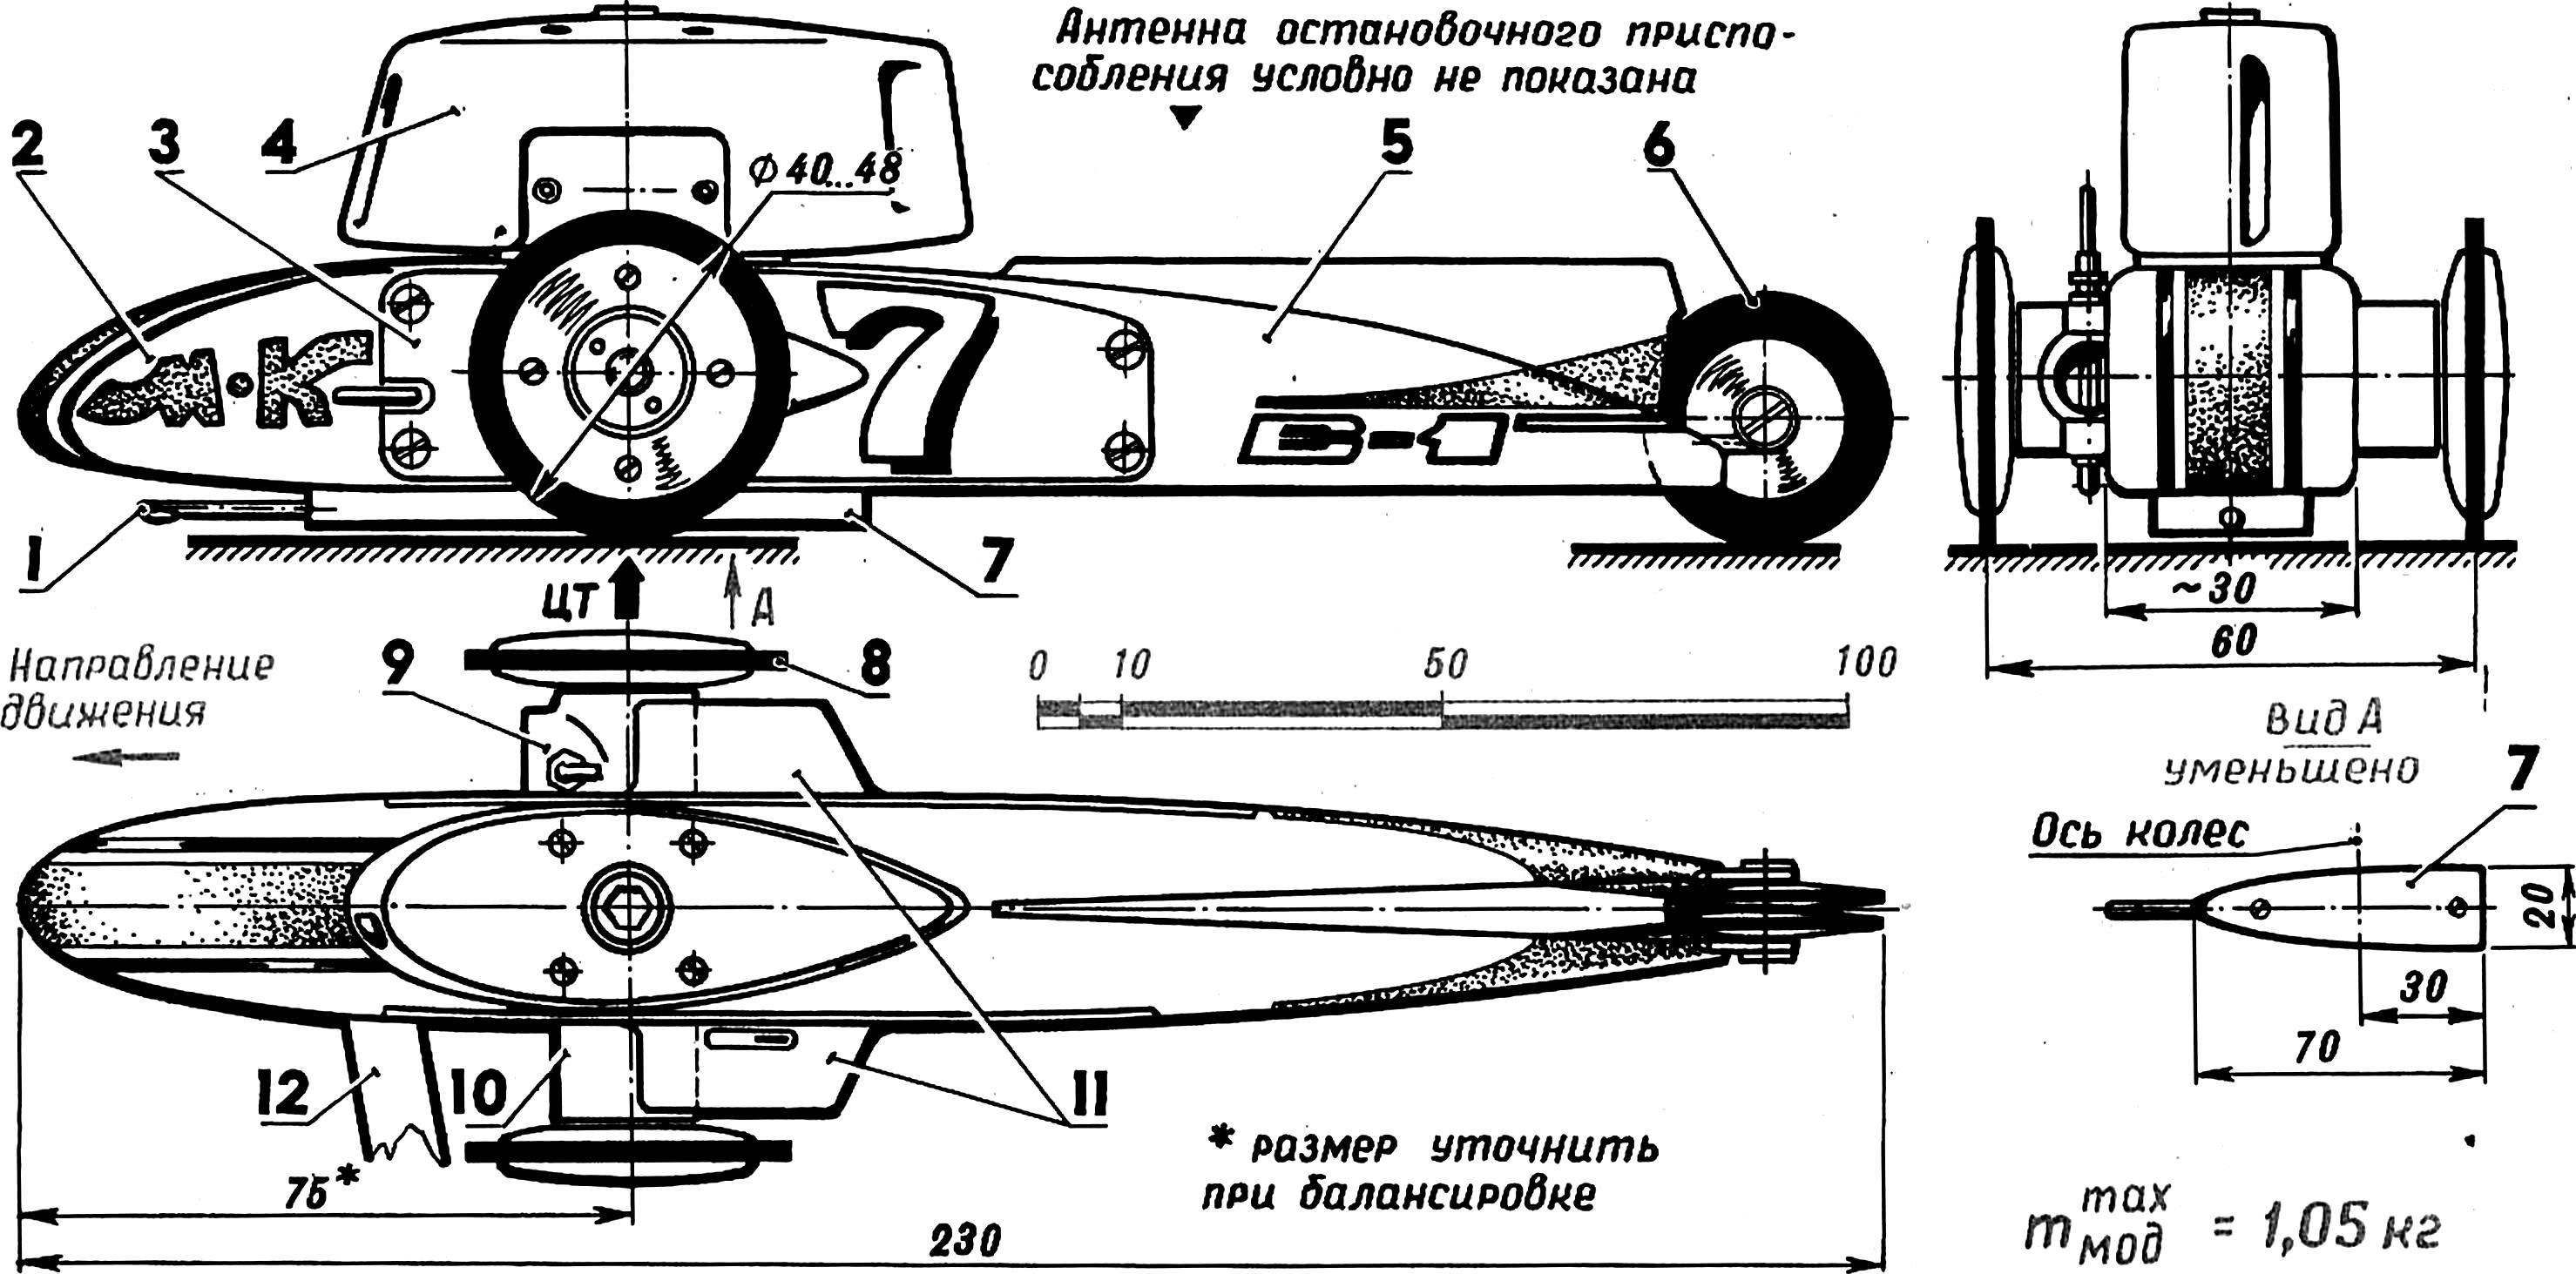 Fig. 1. Control line racing car with an internal combustion motor a working volume of 1.5 cm3.